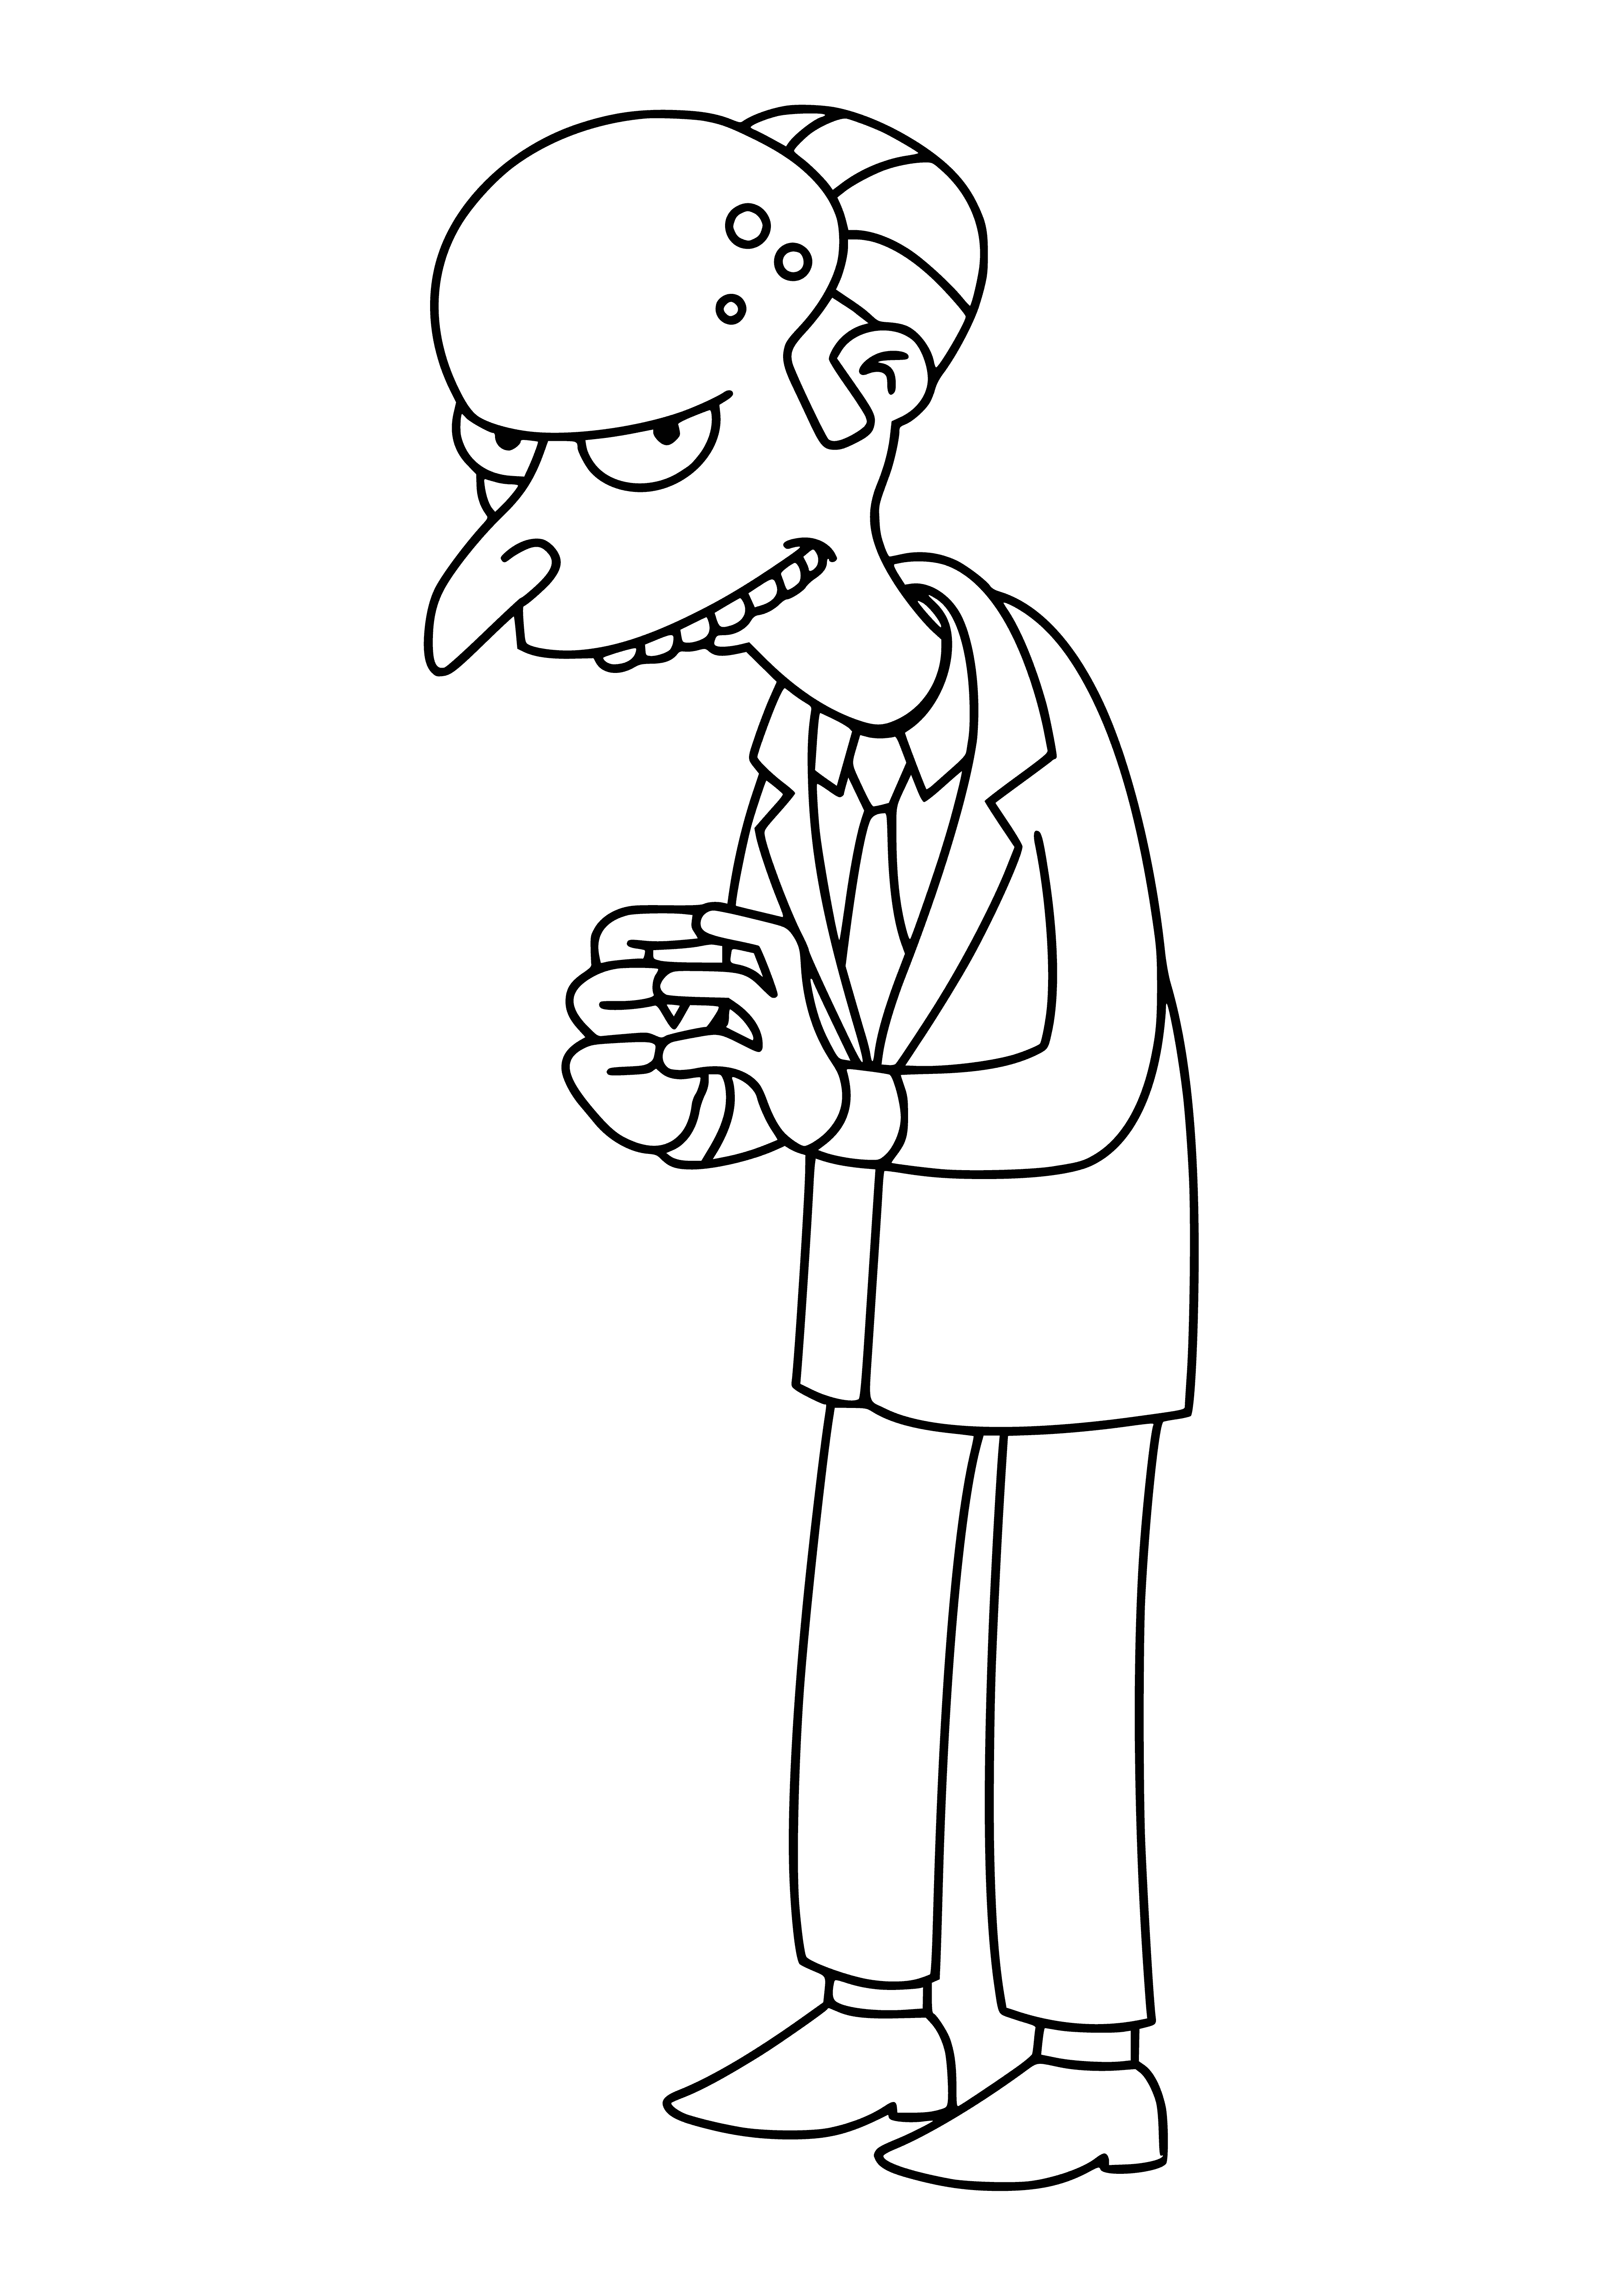 coloring page: Mr. Burns from The Simpsons is an old, wealthy owner of a nuclear power plant, antagonist on the show.